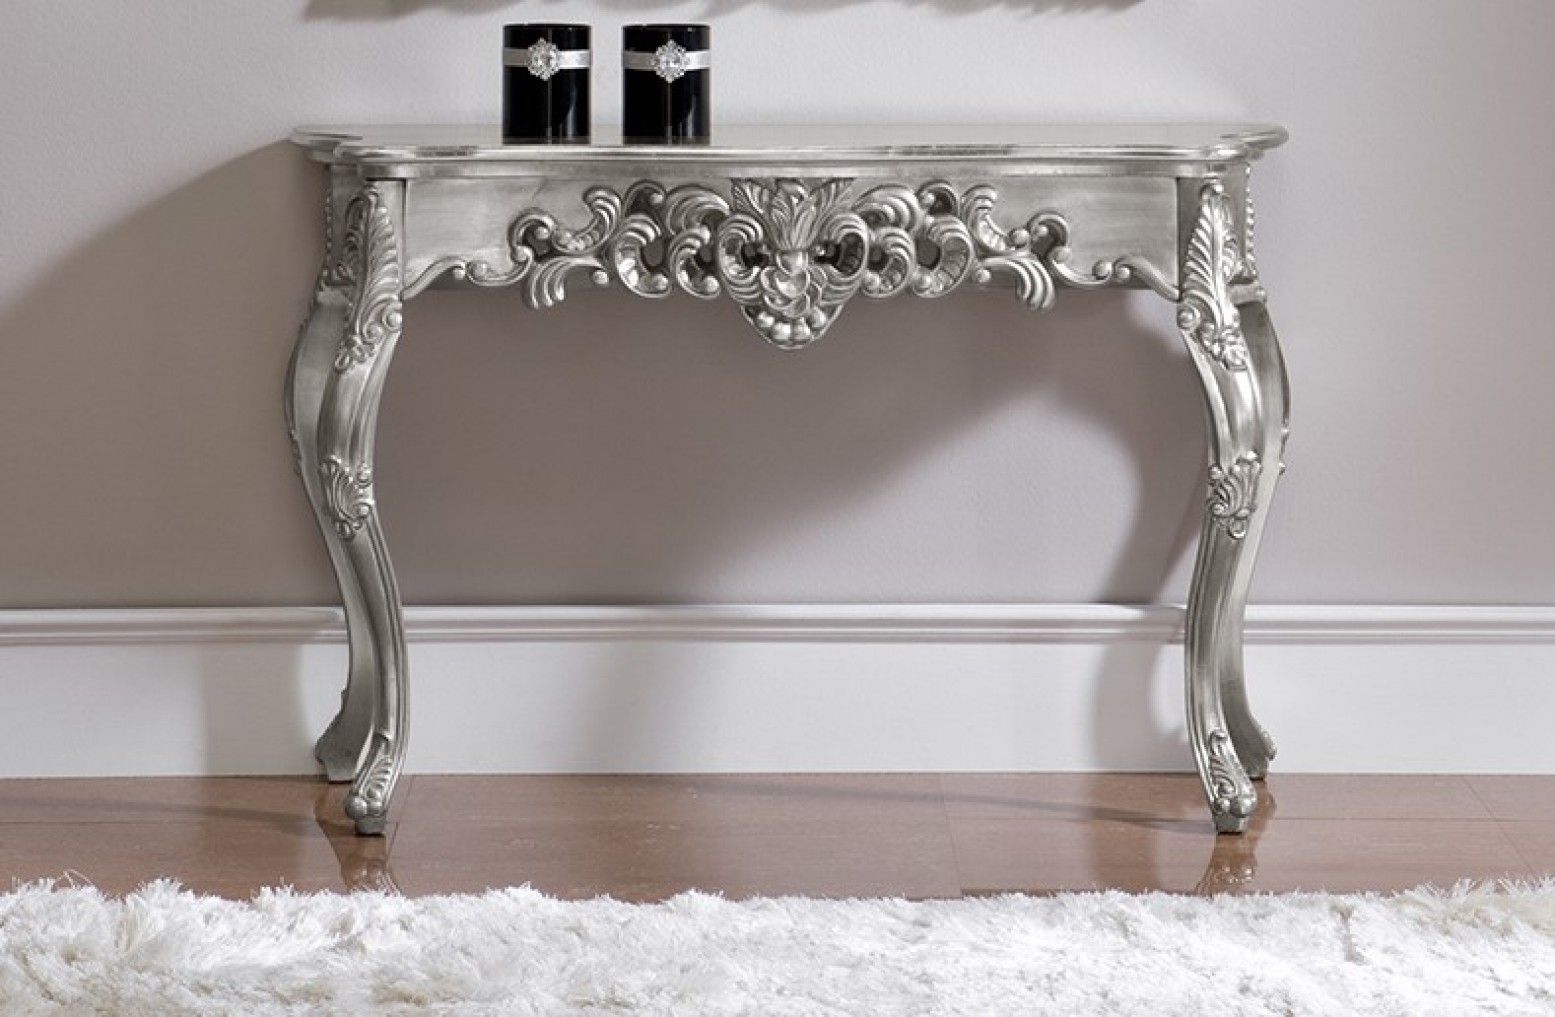 K 58 Console Table, Silver Buy Online At Best Price Regarding Silver Console Tables (View 13 of 20)